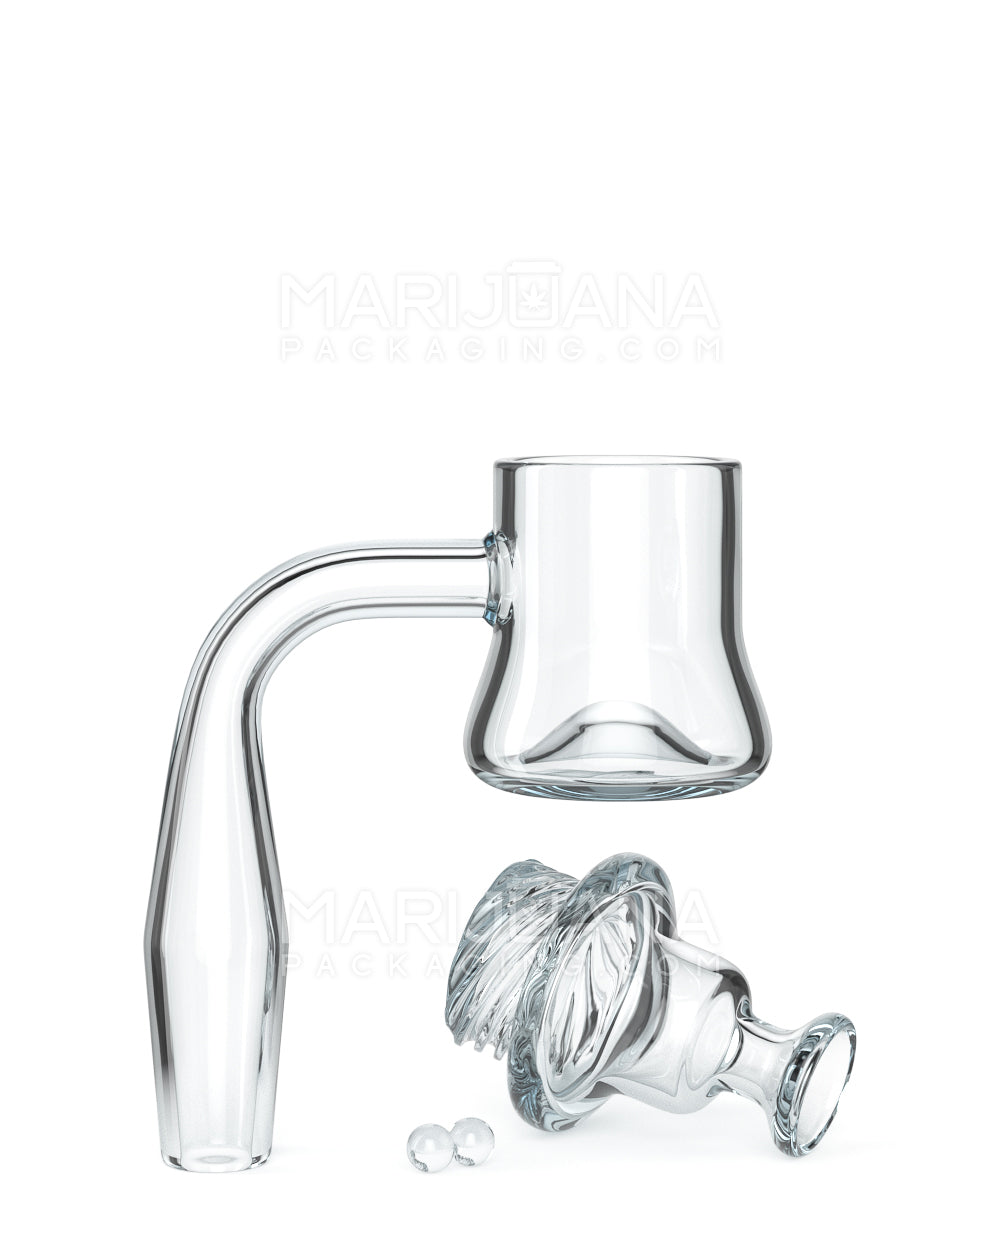 Thick 4mm Quartz Banger Kit w/ Bell Spinner Carb Cap & 2 Pearls | 14mm - 90 Degree - Male - 3